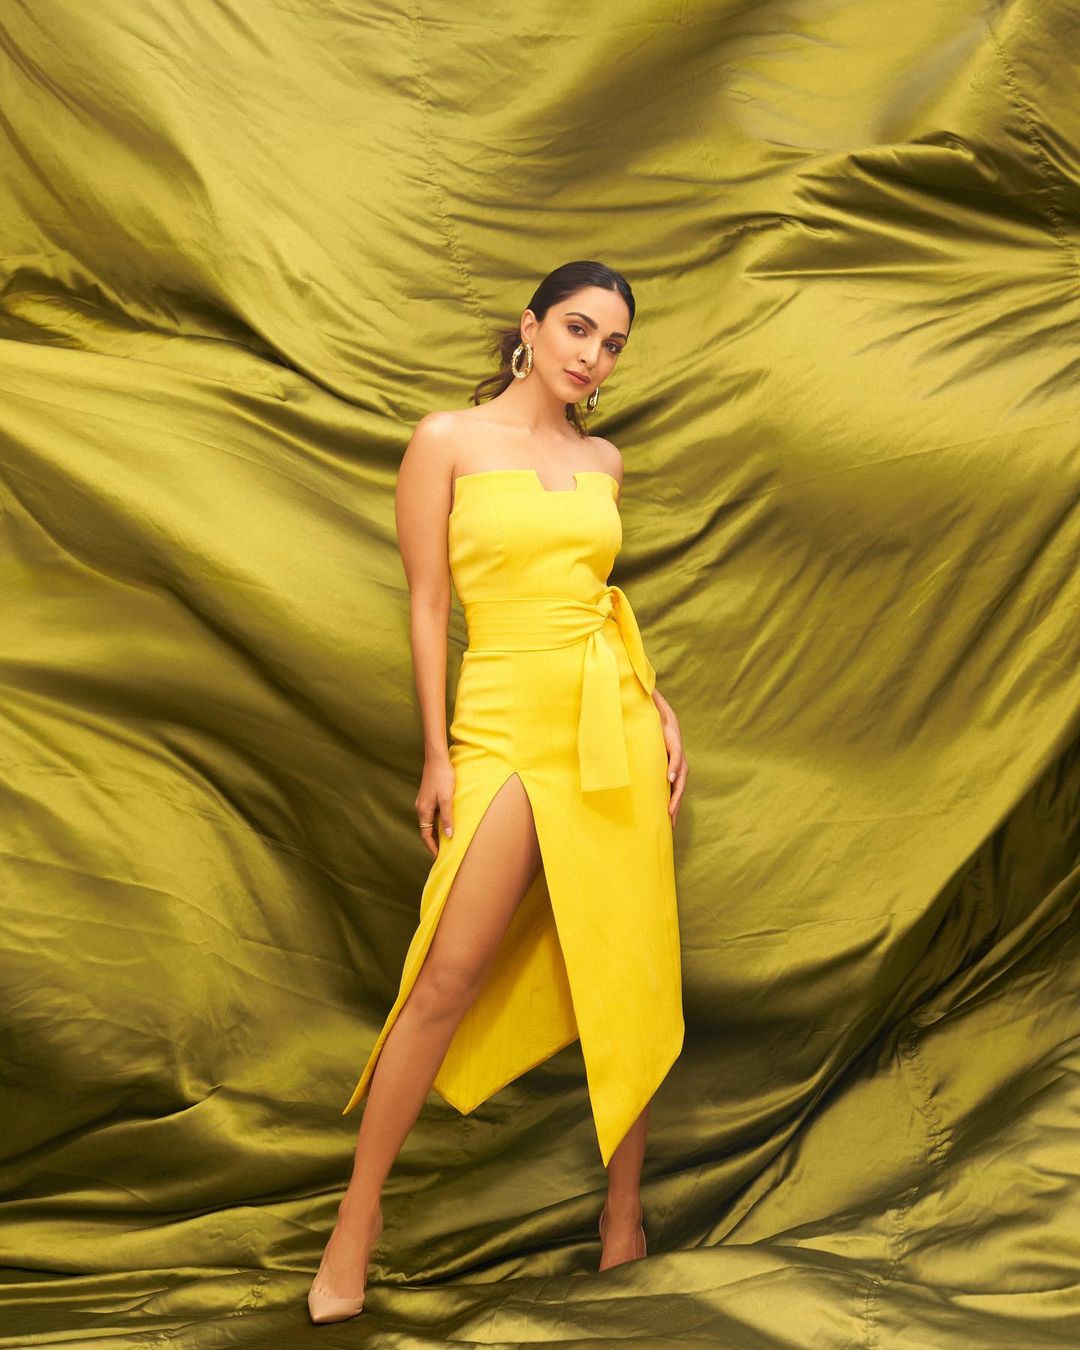 Kiara Advani loves the vibrant yellow hue. An indeed, the colour looks gorgeous on her. Seen here in Kiara in a high-slit yellow dress. 